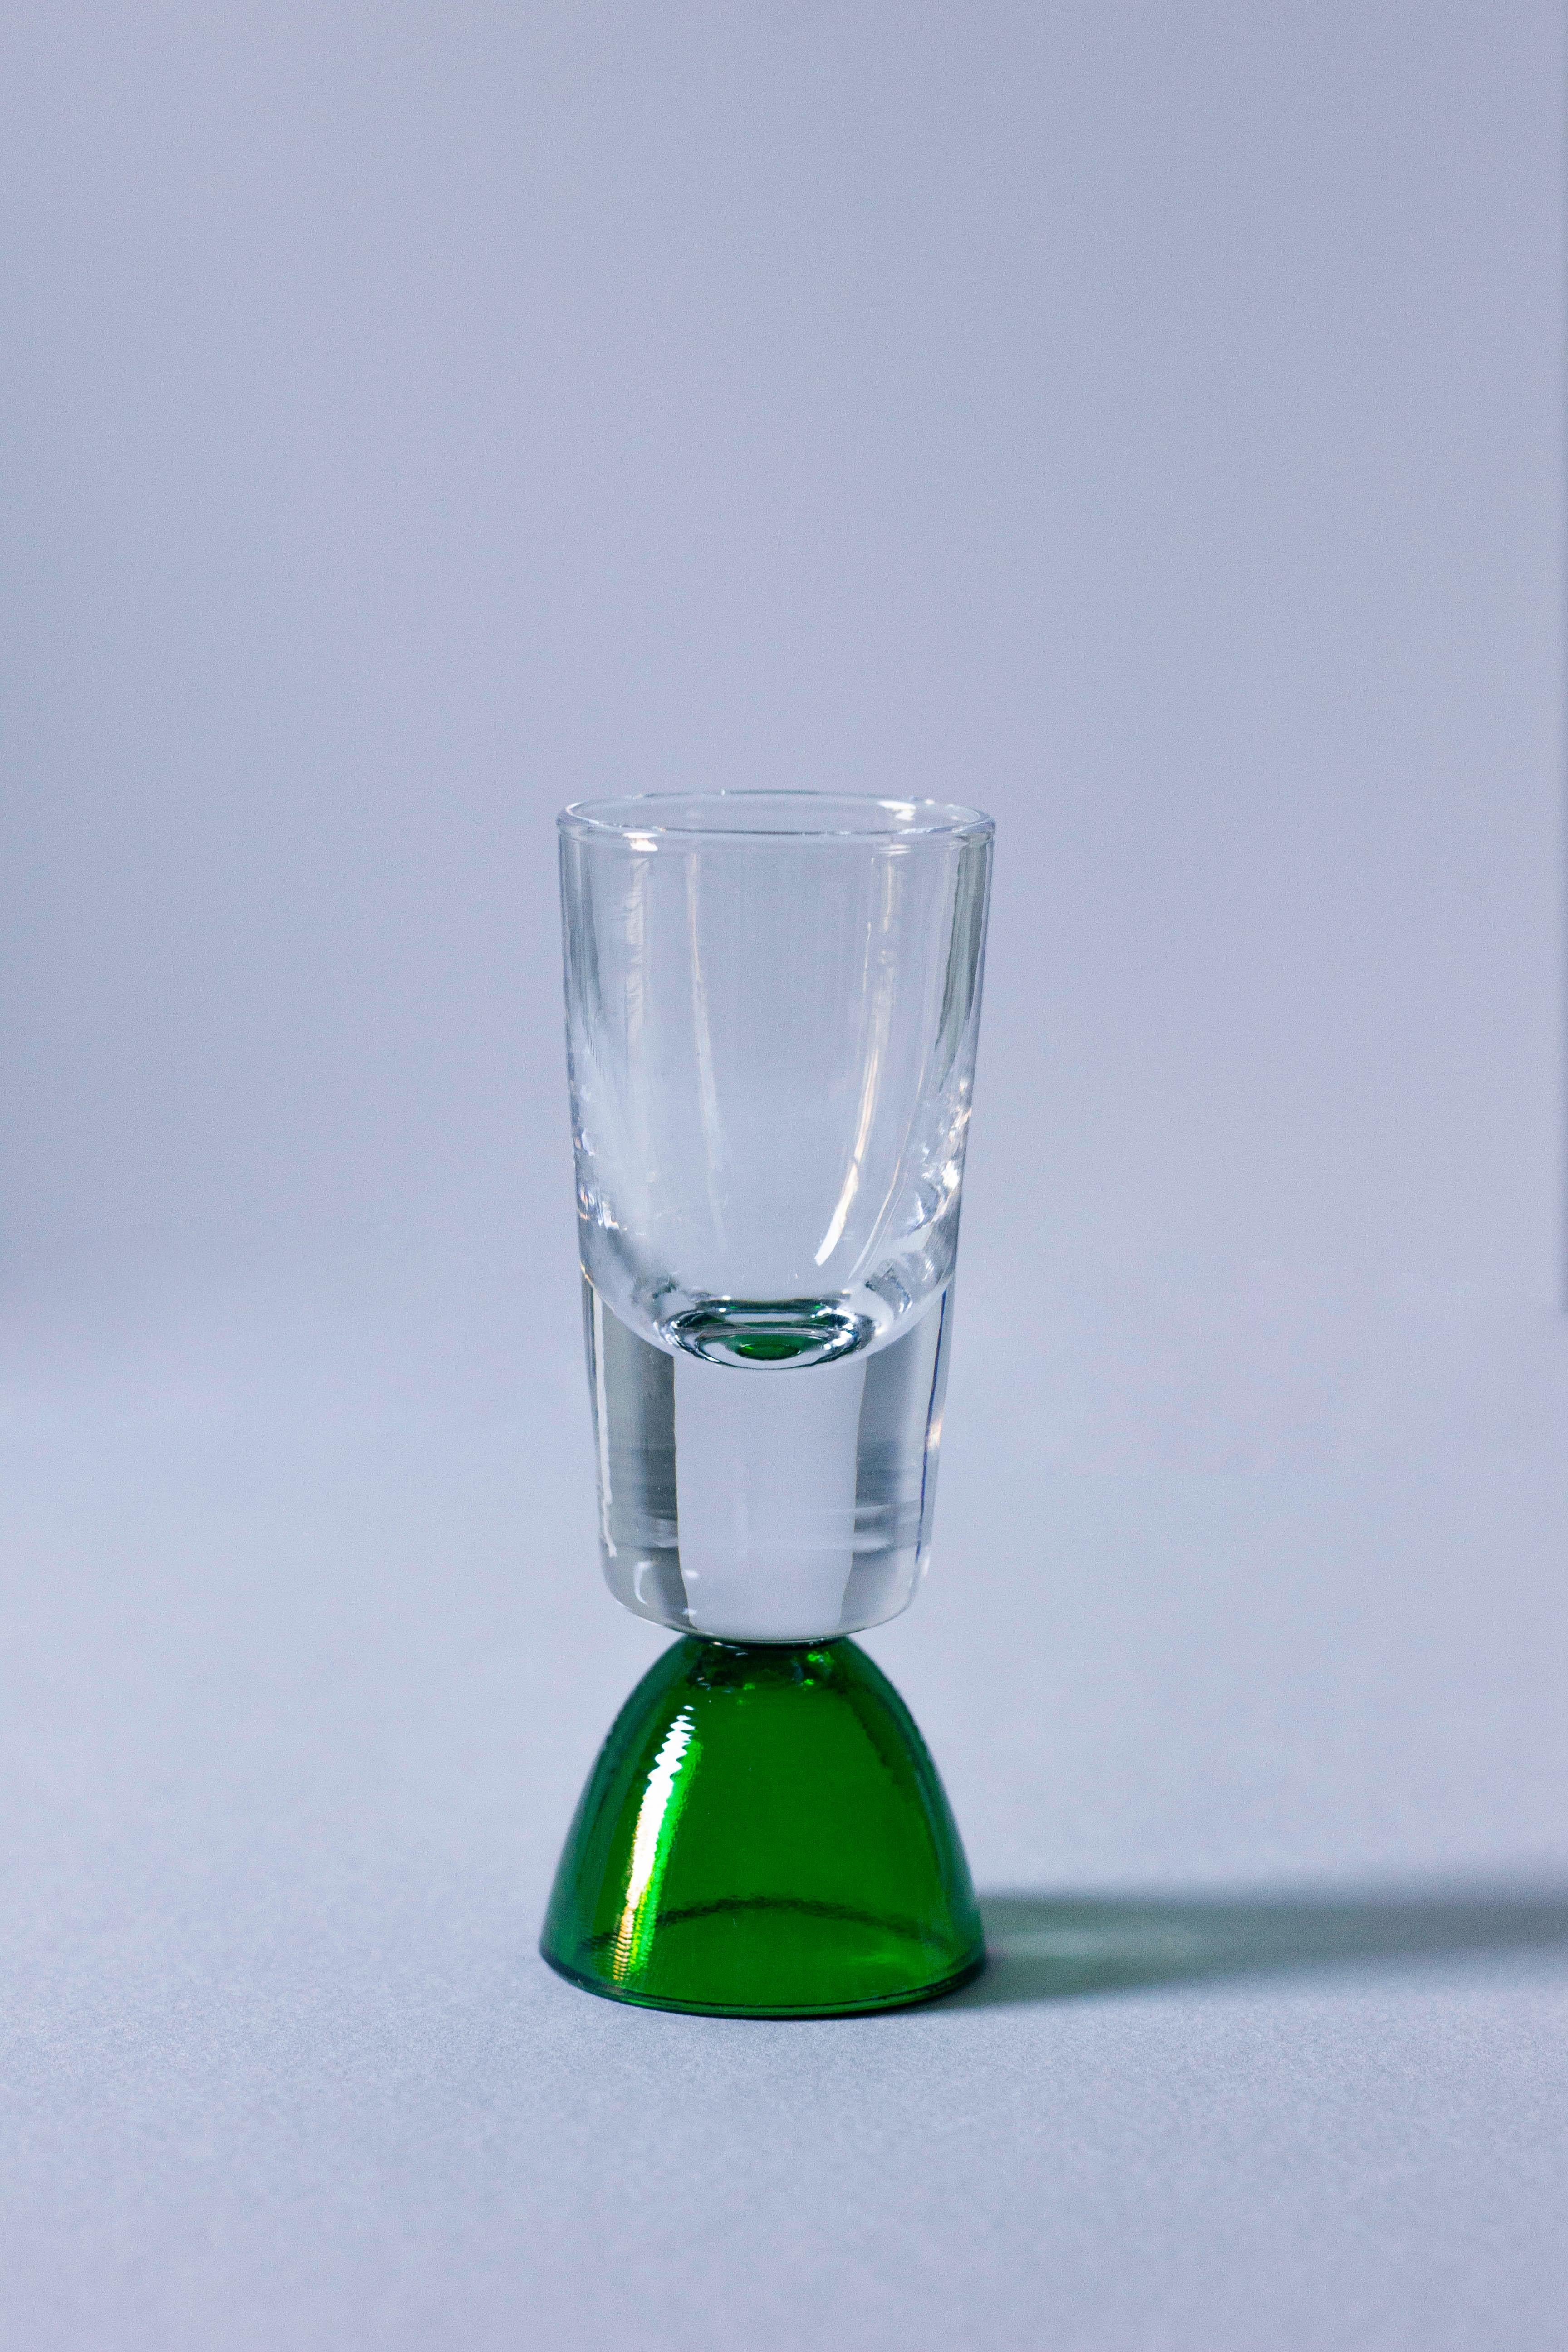 Enjoy a shot with this tequila glass, handcrafted in Tuscany by skilled artisans. Ideal for savoring tequila, mezcal, or other fine spirits, this glass from the wonder crystals collection comes in a clear/green adding sophistication to your table